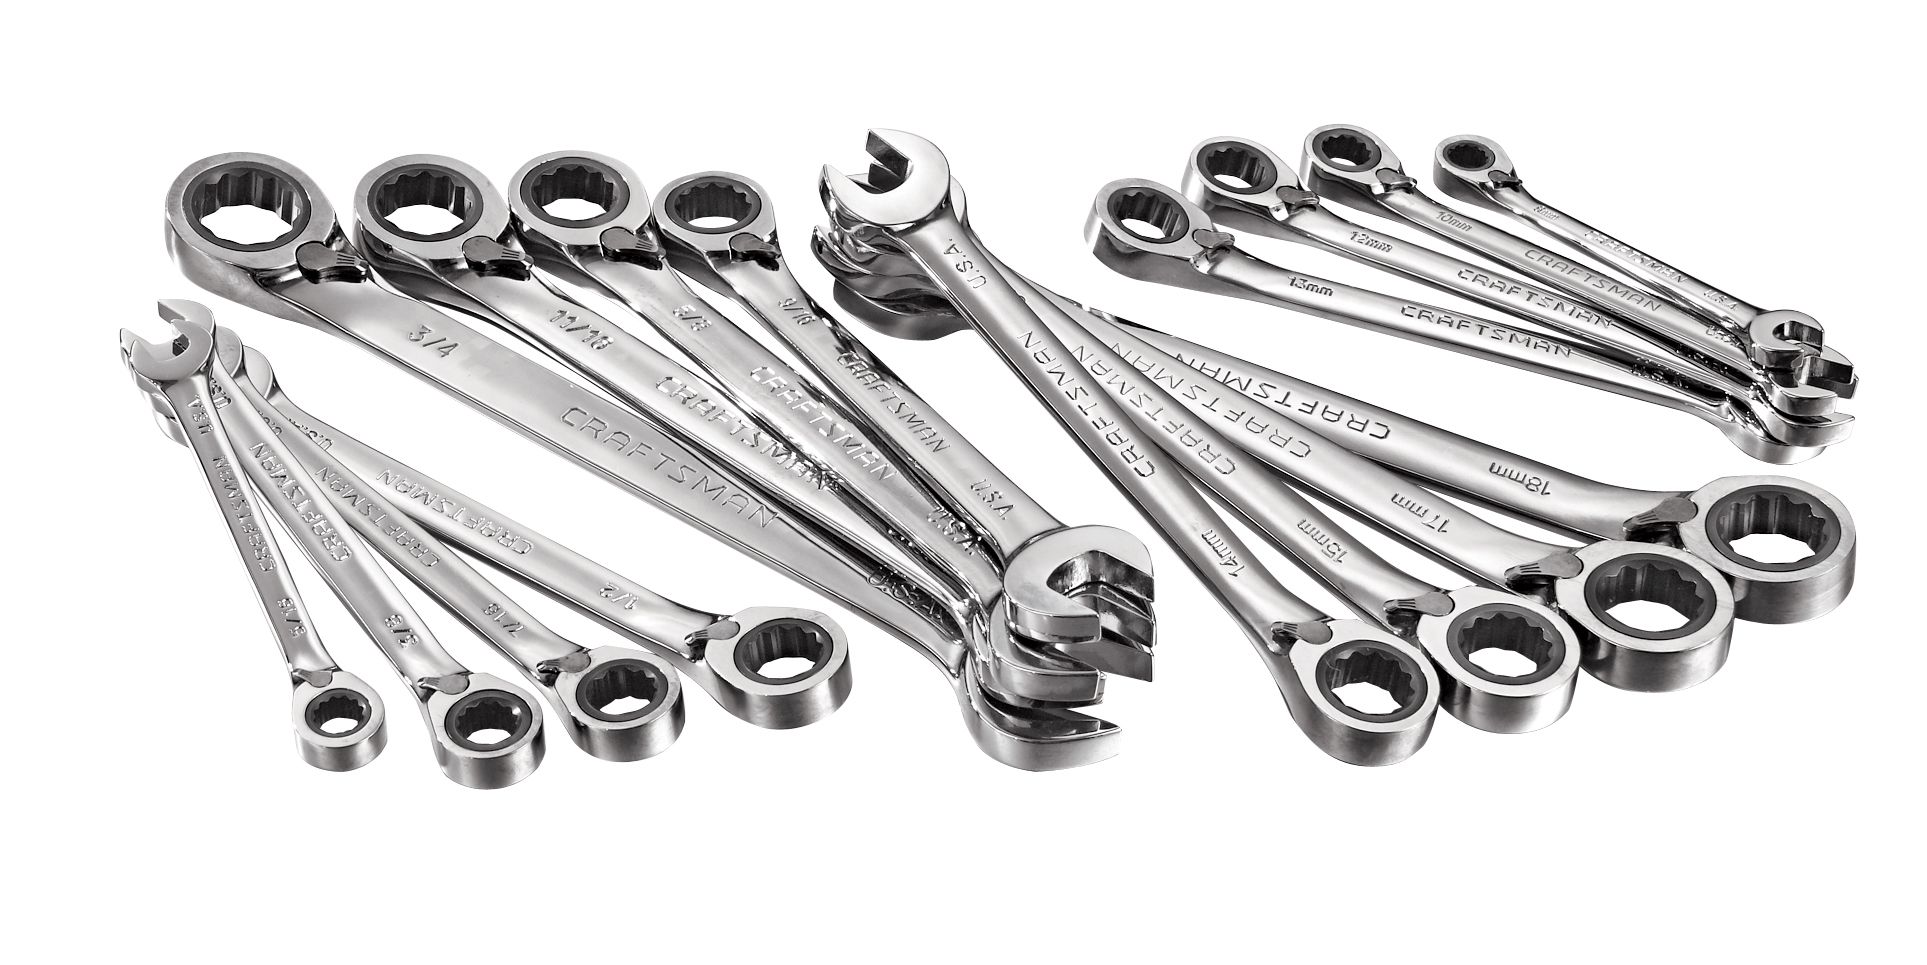 Craftsman 16 pc. Standard & Metric Full Polish Reversible Ratcheting Combination Wrenches